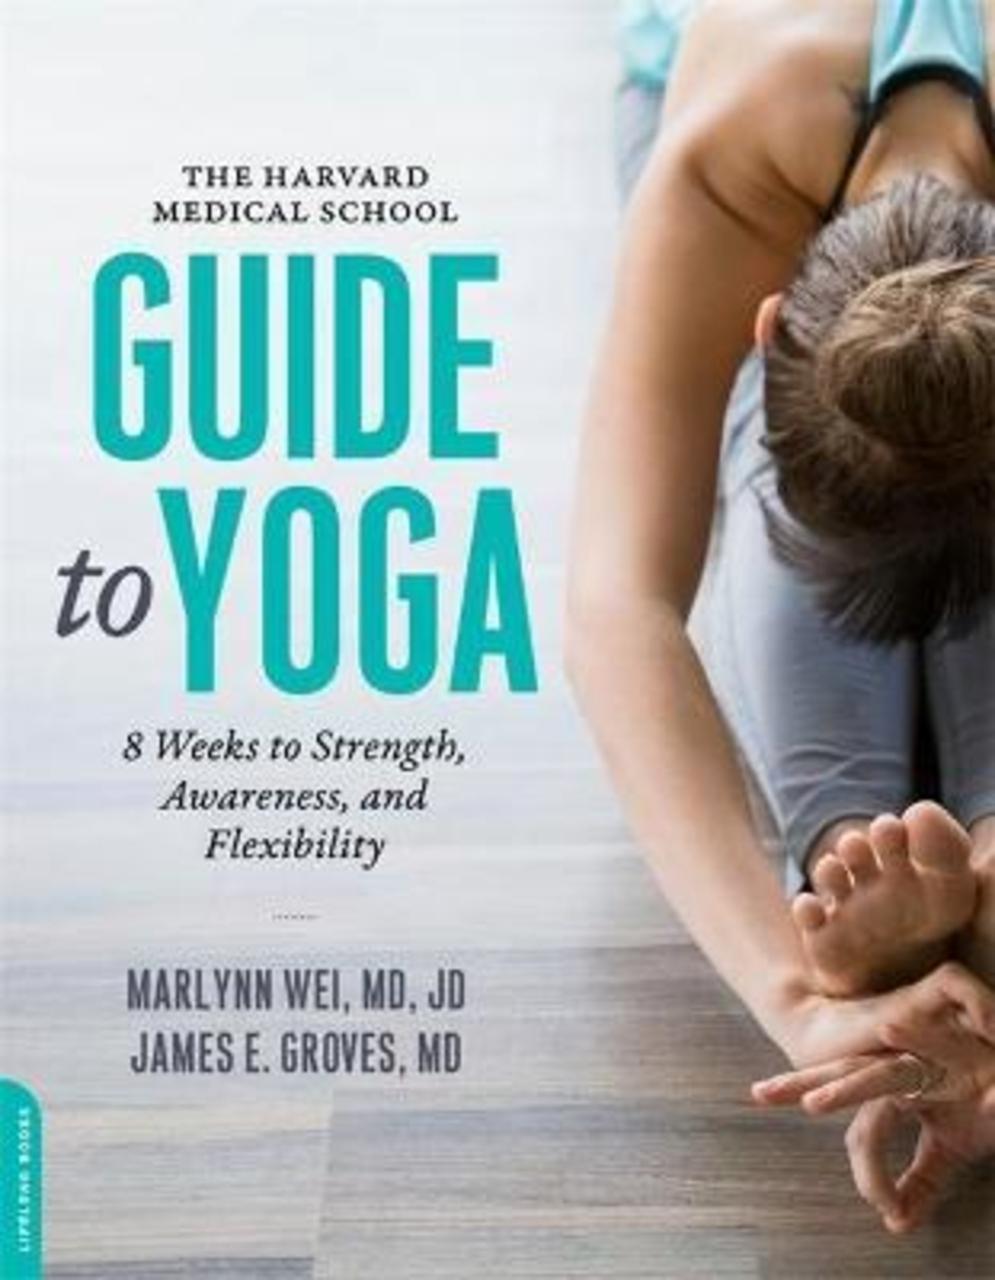 Sách - The Harvard Medical School Guide to Yoga : 8 Weeks to Strength, Aware by M.D. Marilyn Wei (US edition, paperback)